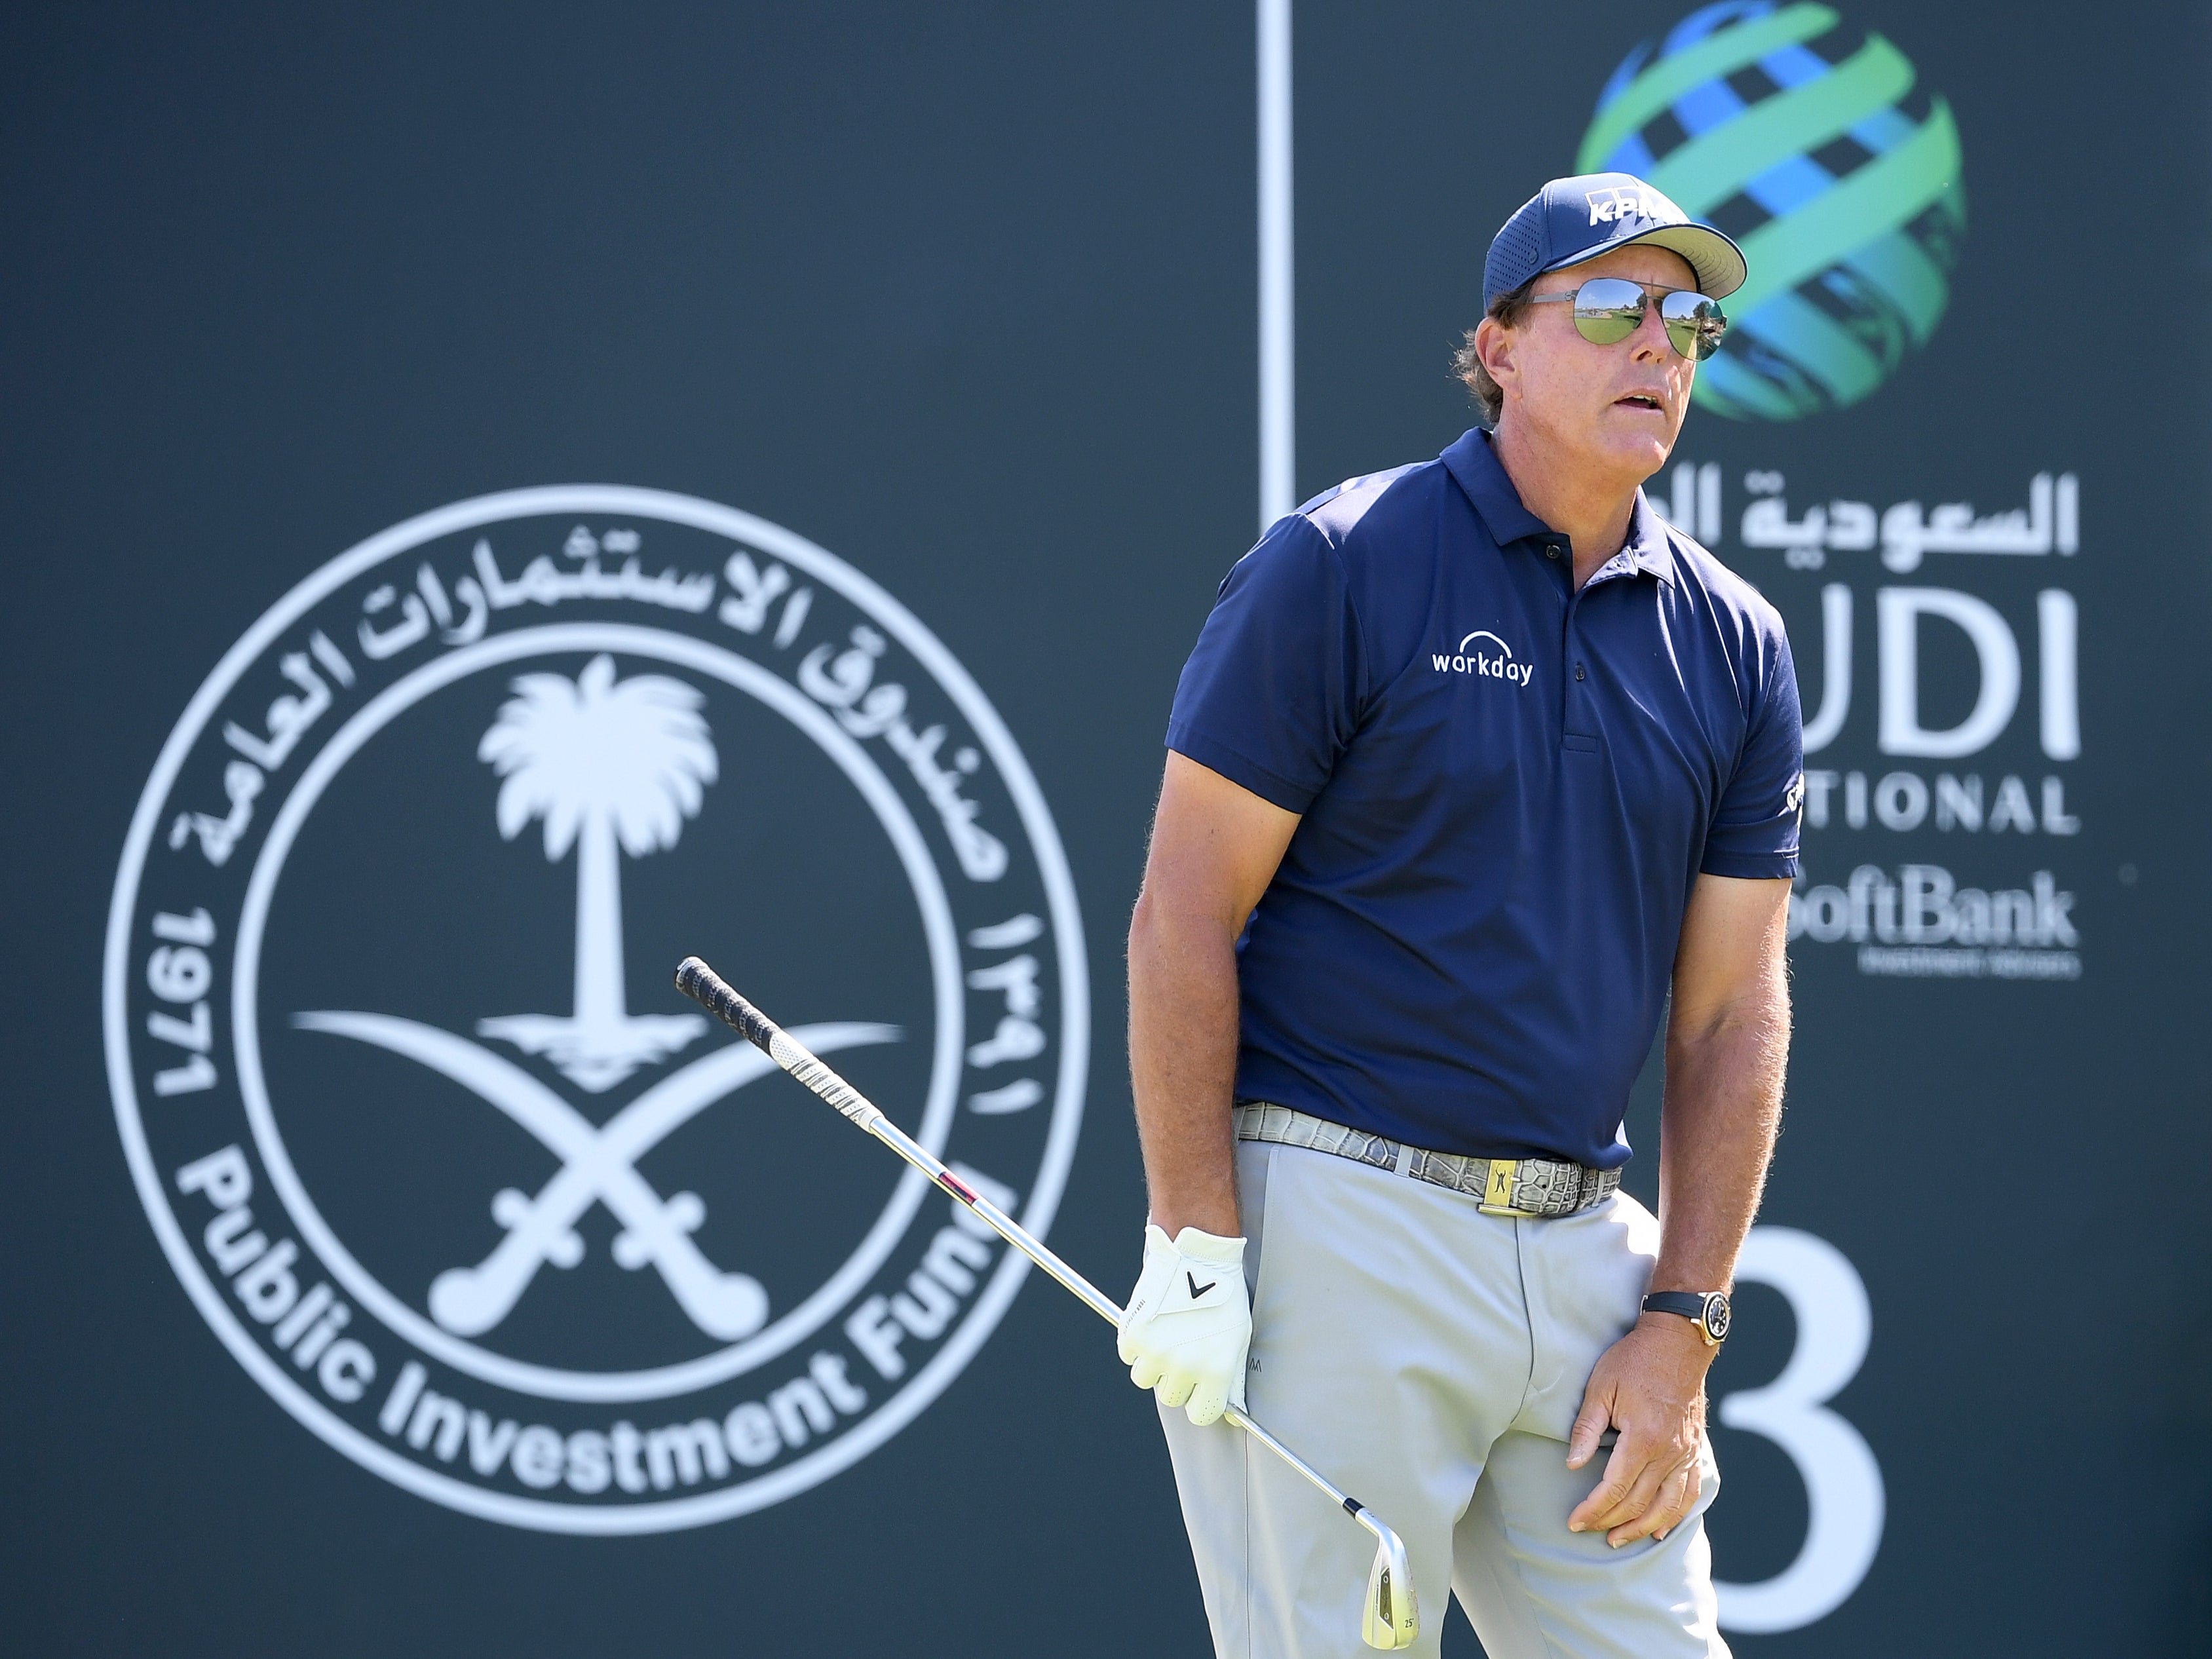 Phil Mickelson competes at the 2021 Saudi International tournament